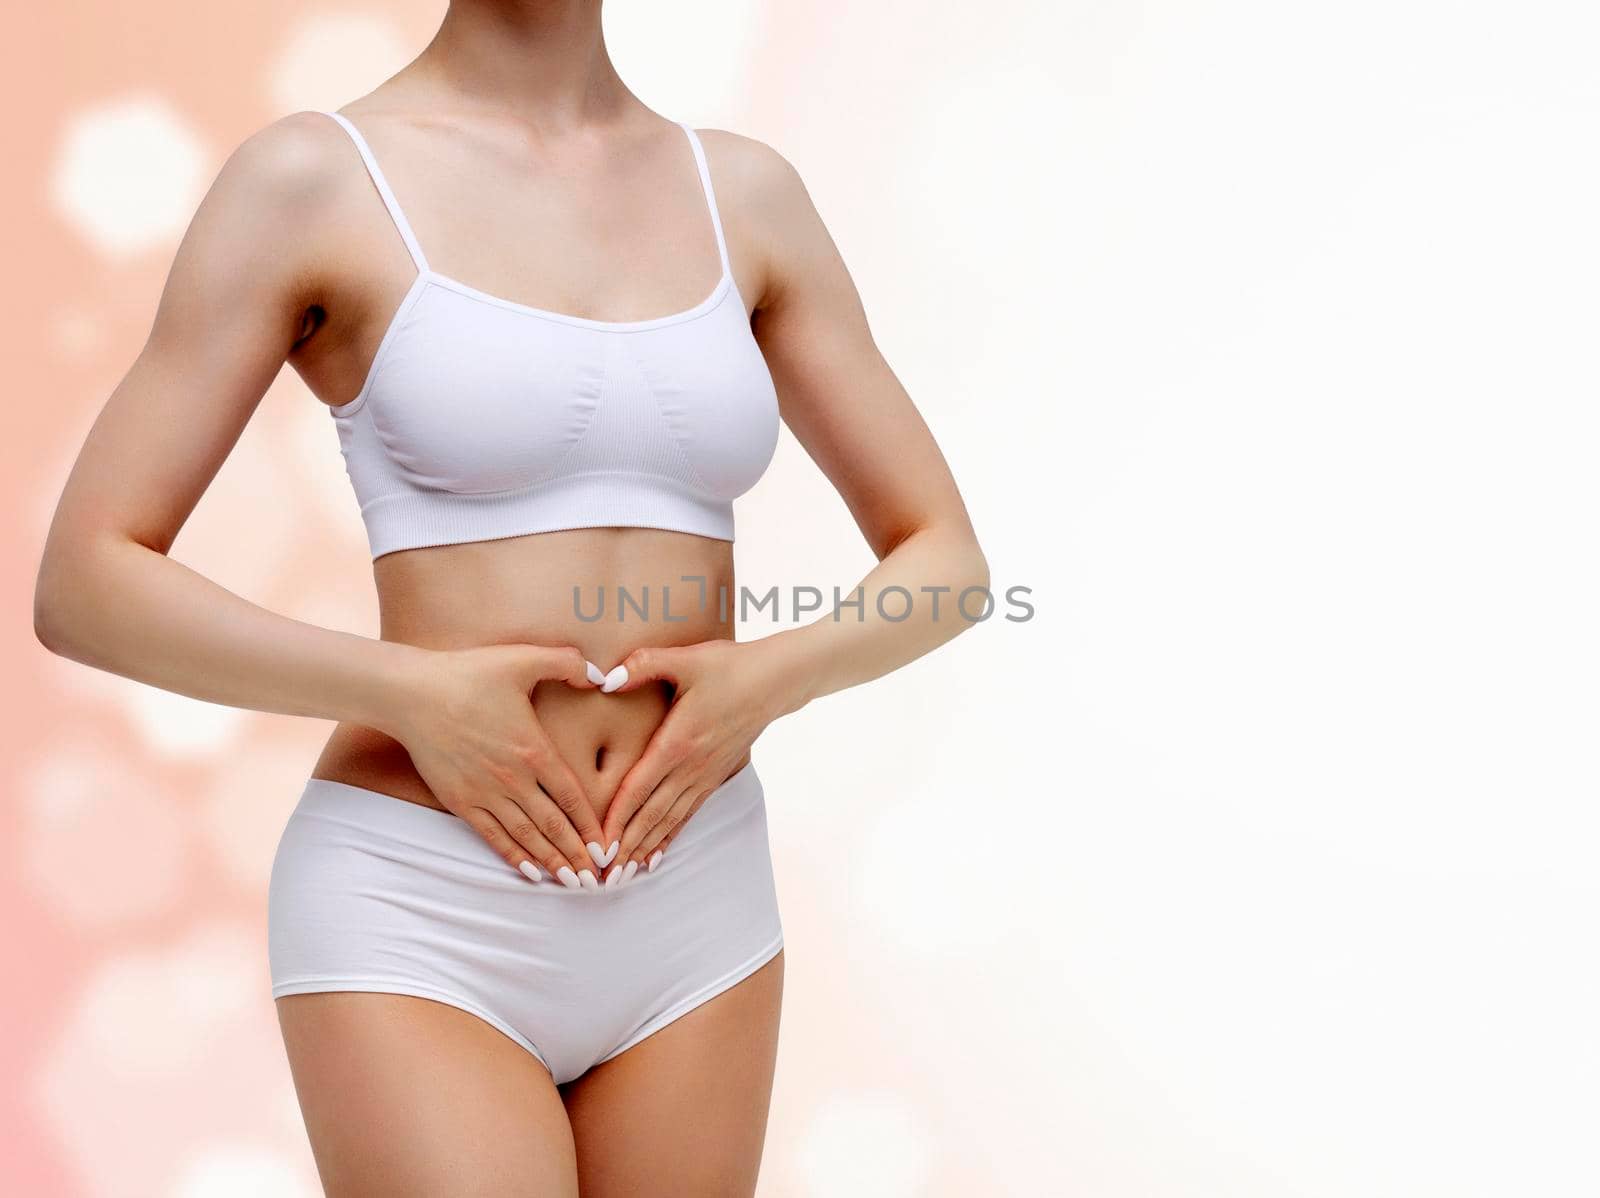 Slim woman in white underwear forming a heart symbol with her hands on her belly against an abstract background with circles and copyspace by Nobilior